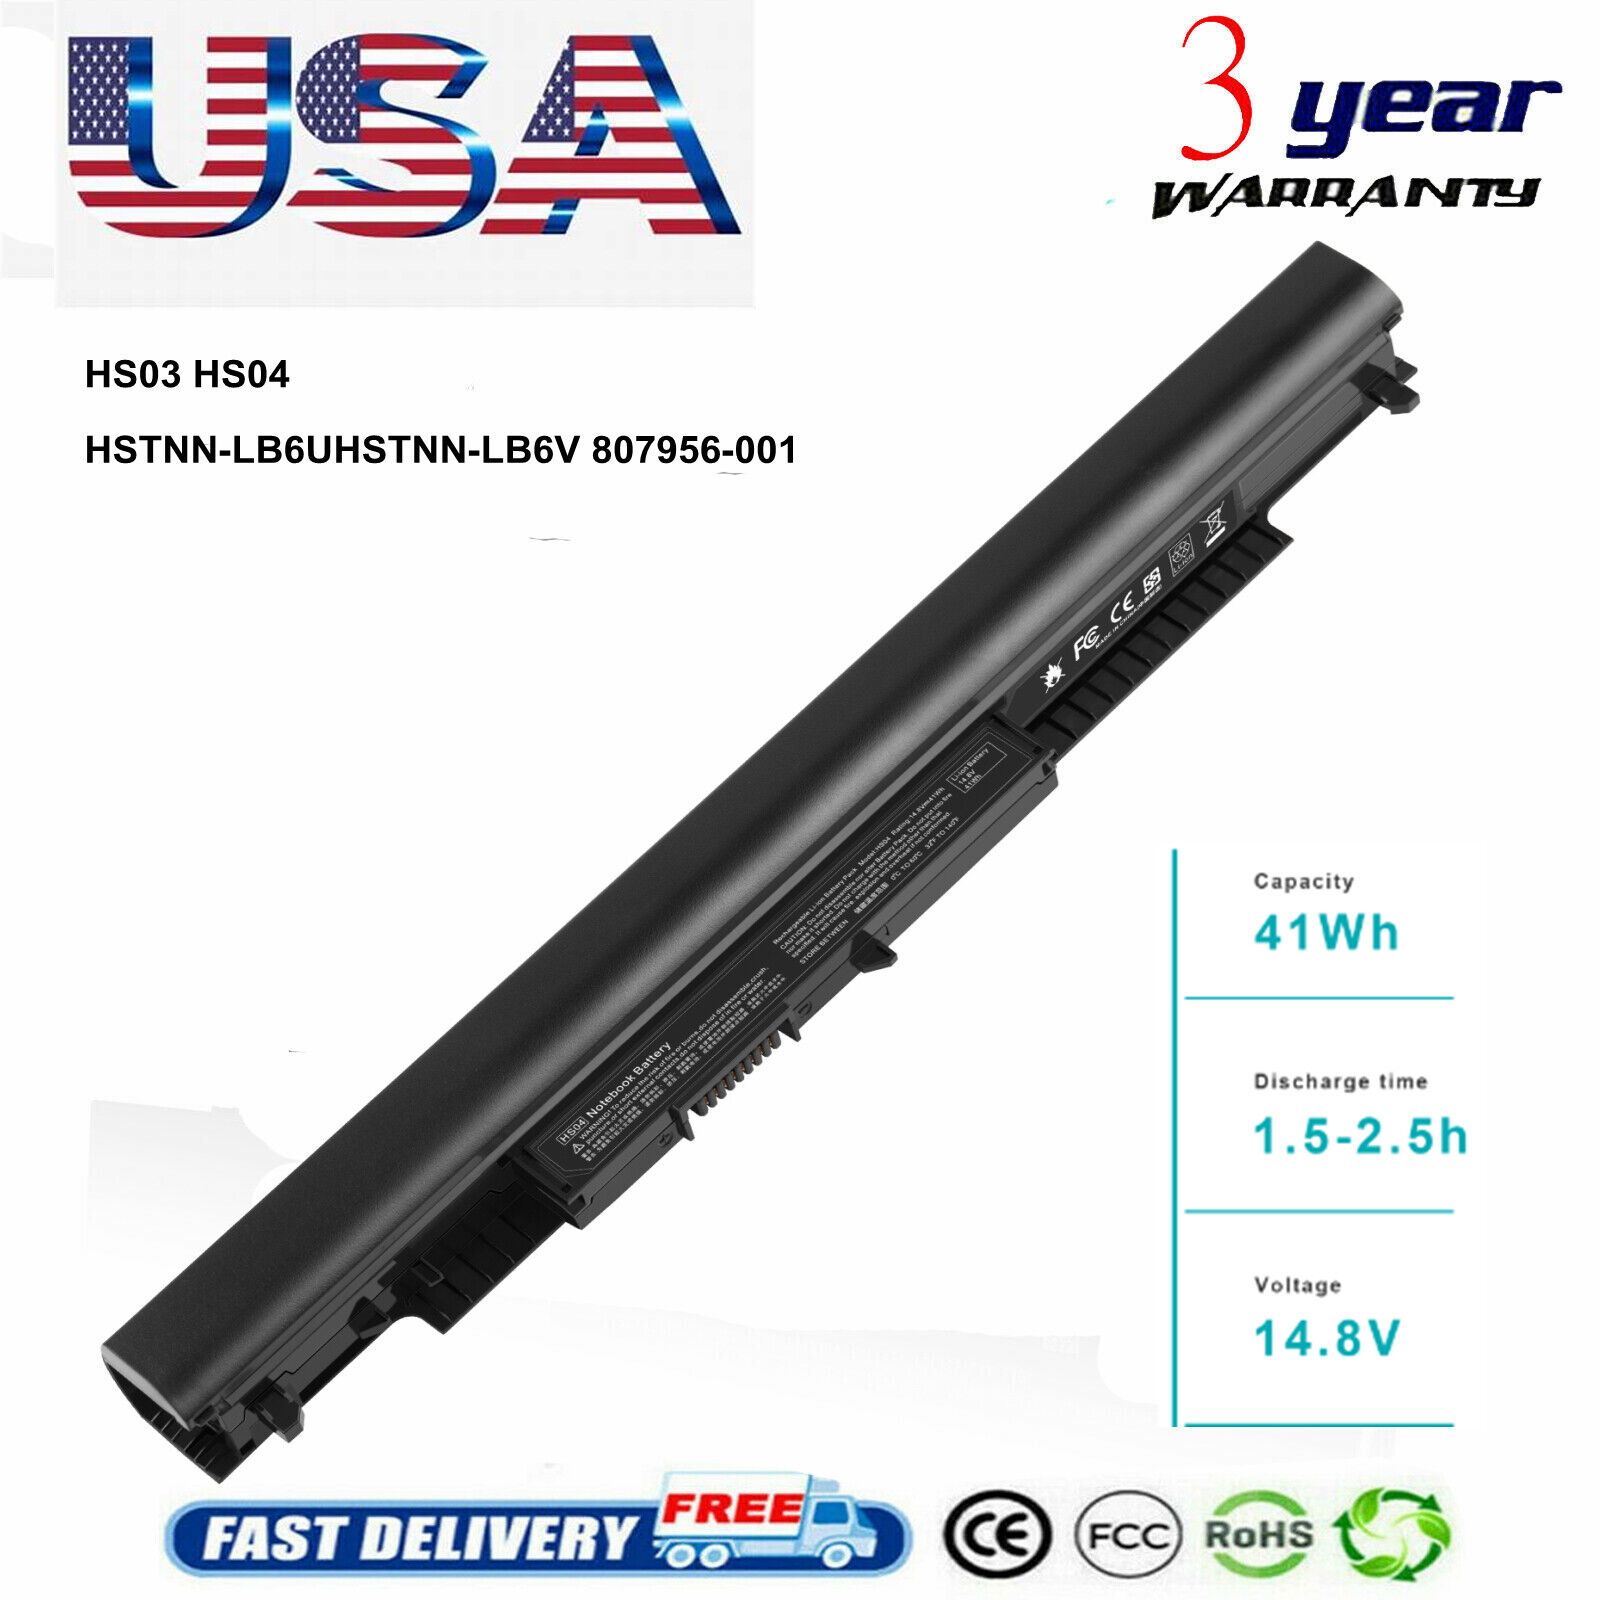 ✅HS03 HS04 Rechargeable Battery for HP Spare 807957-001 807956-001 807612-421